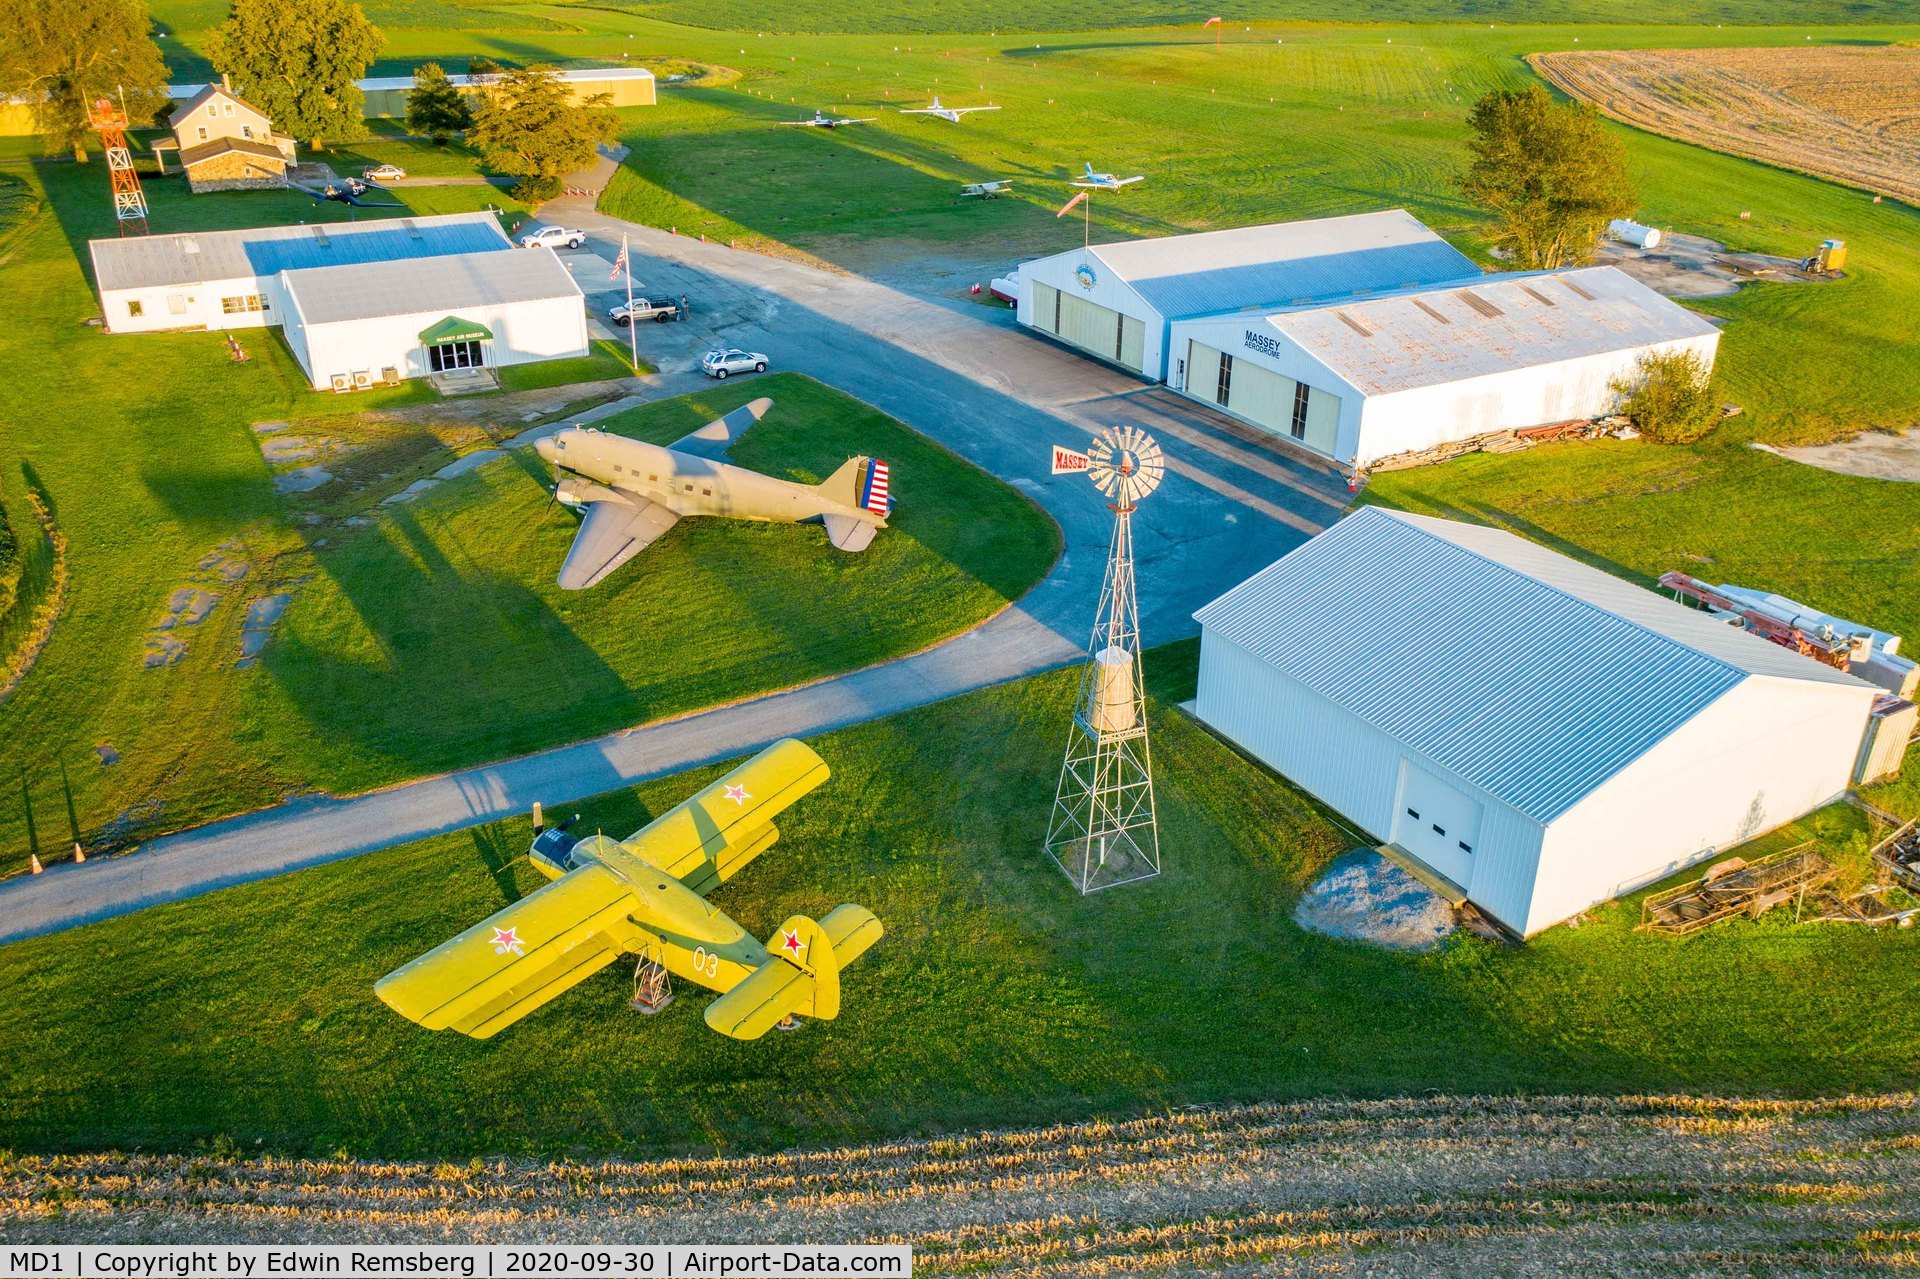 Massey Aerodrome Airport (MD1) - Massey Air Museum at Massey Aerodrome MD1, Grassroots Aviation on the Eastern Shore of Maryland - Photo by Edwin Remsberg
